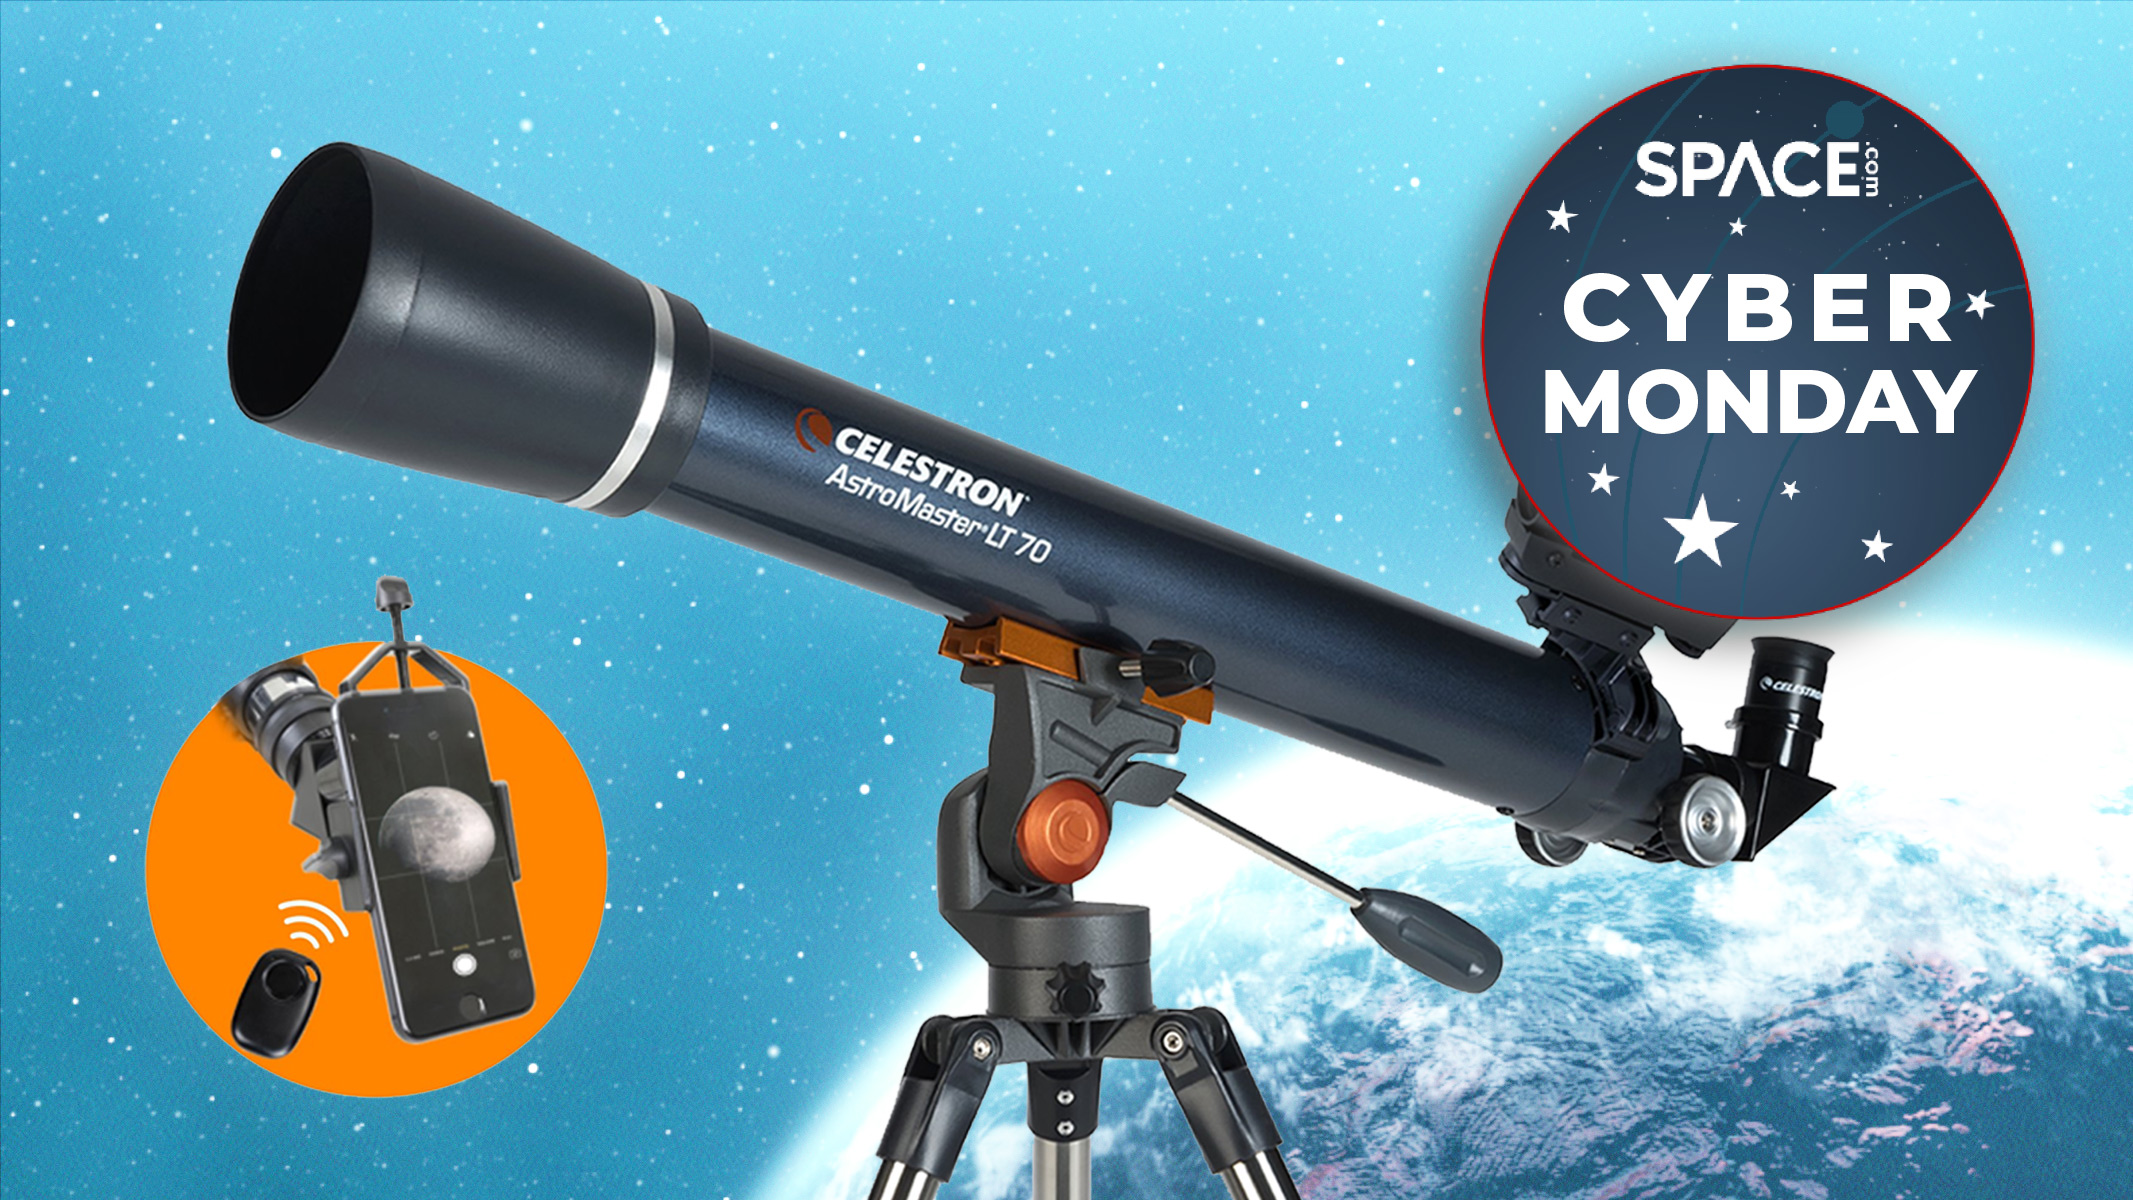 Celestron astromaster lt70az with starry background and cyber monday deal logo